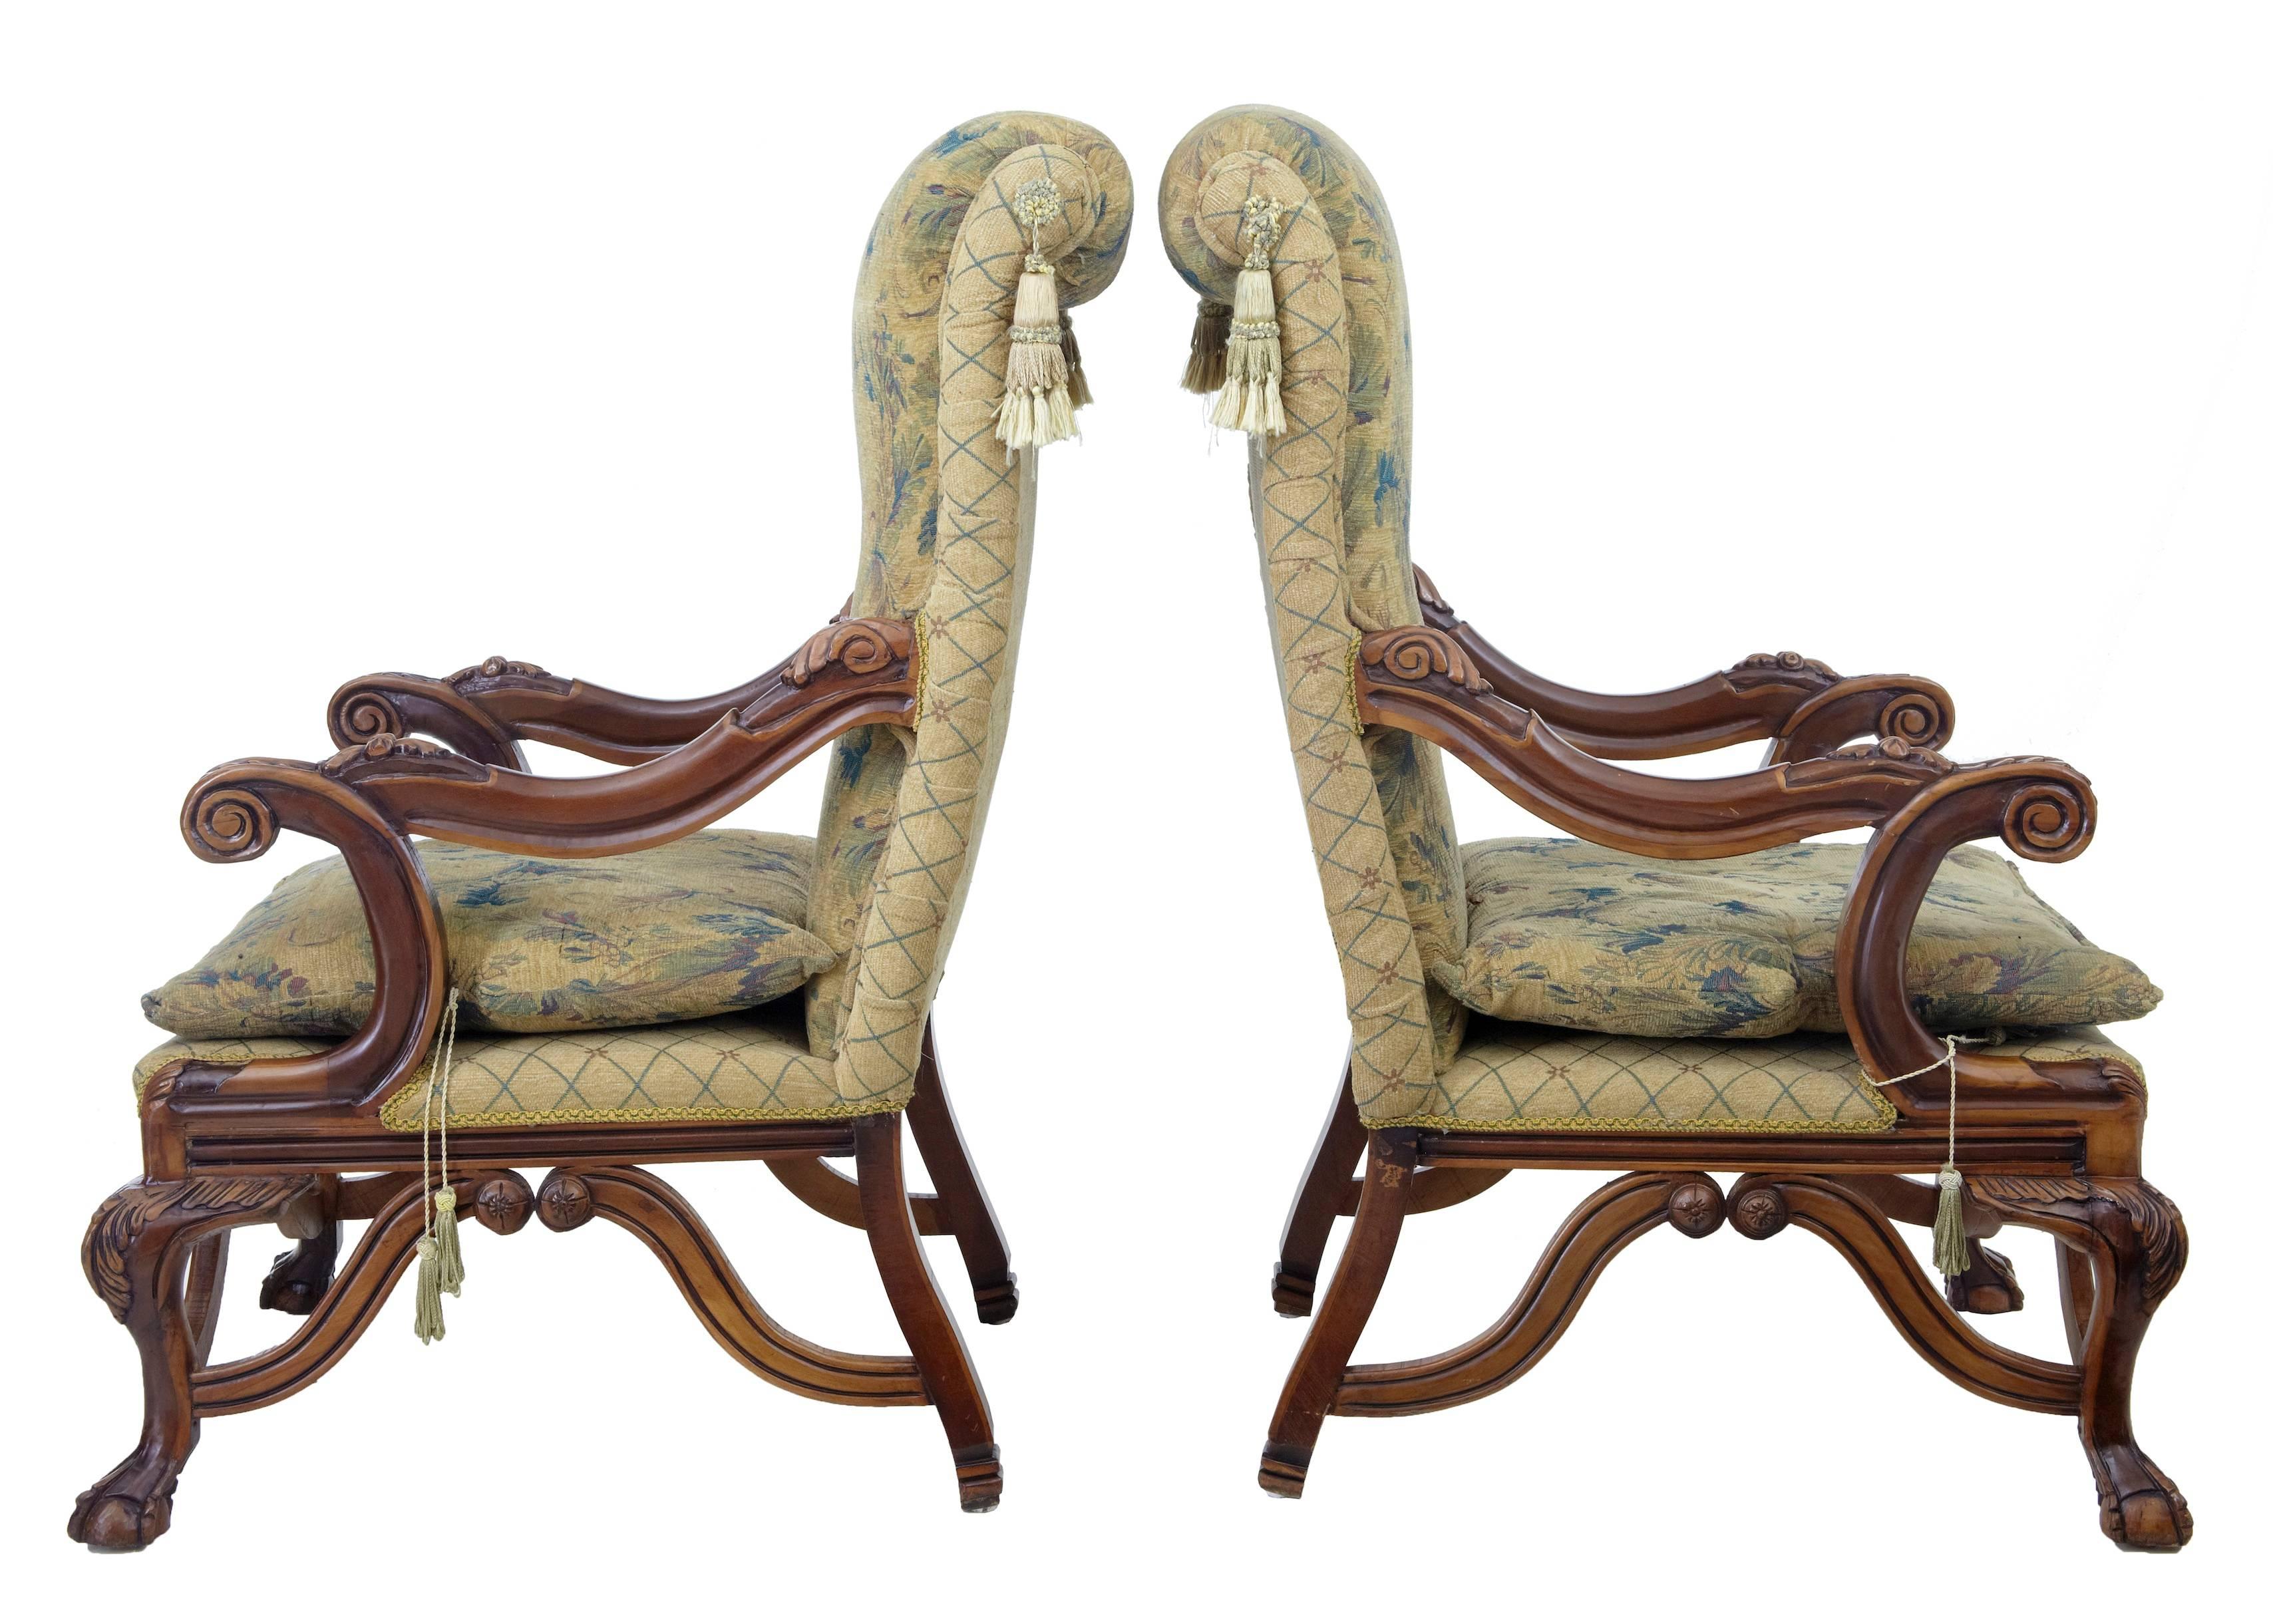 Armchairs.
Large pair of Baltic armchairs, circa 1970.
Carved and polished to highlight two tonewood.
Carved with acanthus leaf to the knee, scrolling arms.
Standing on ball and claw feet.
Measures:
Height: 49